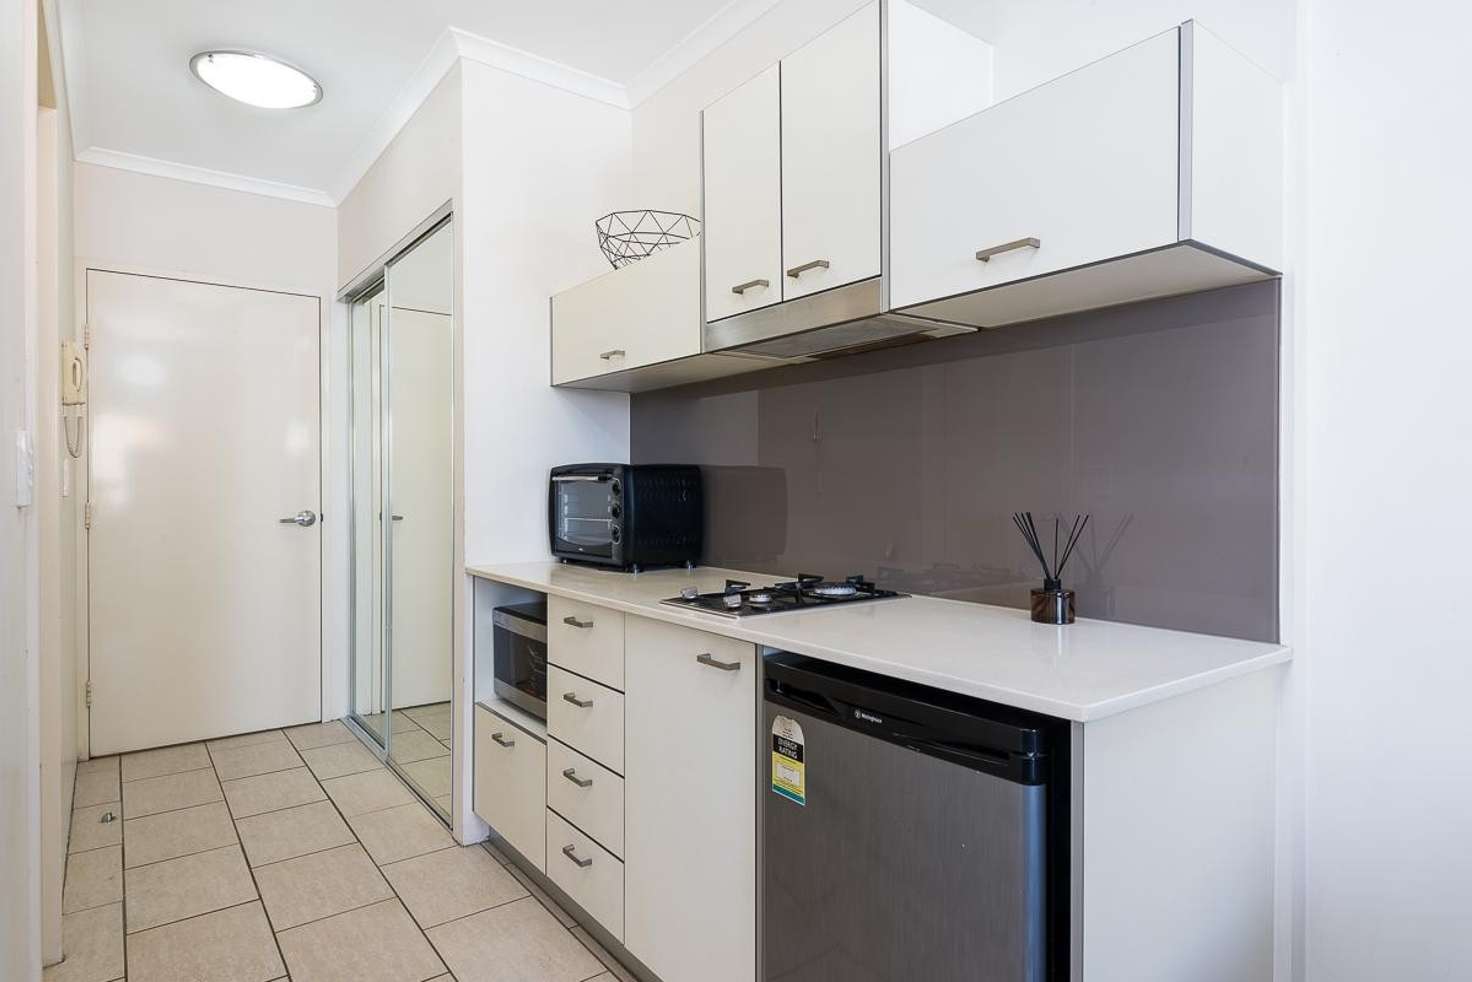 Main view of Homely studio listing, 6 Exford St, Brisbane QLD 4000